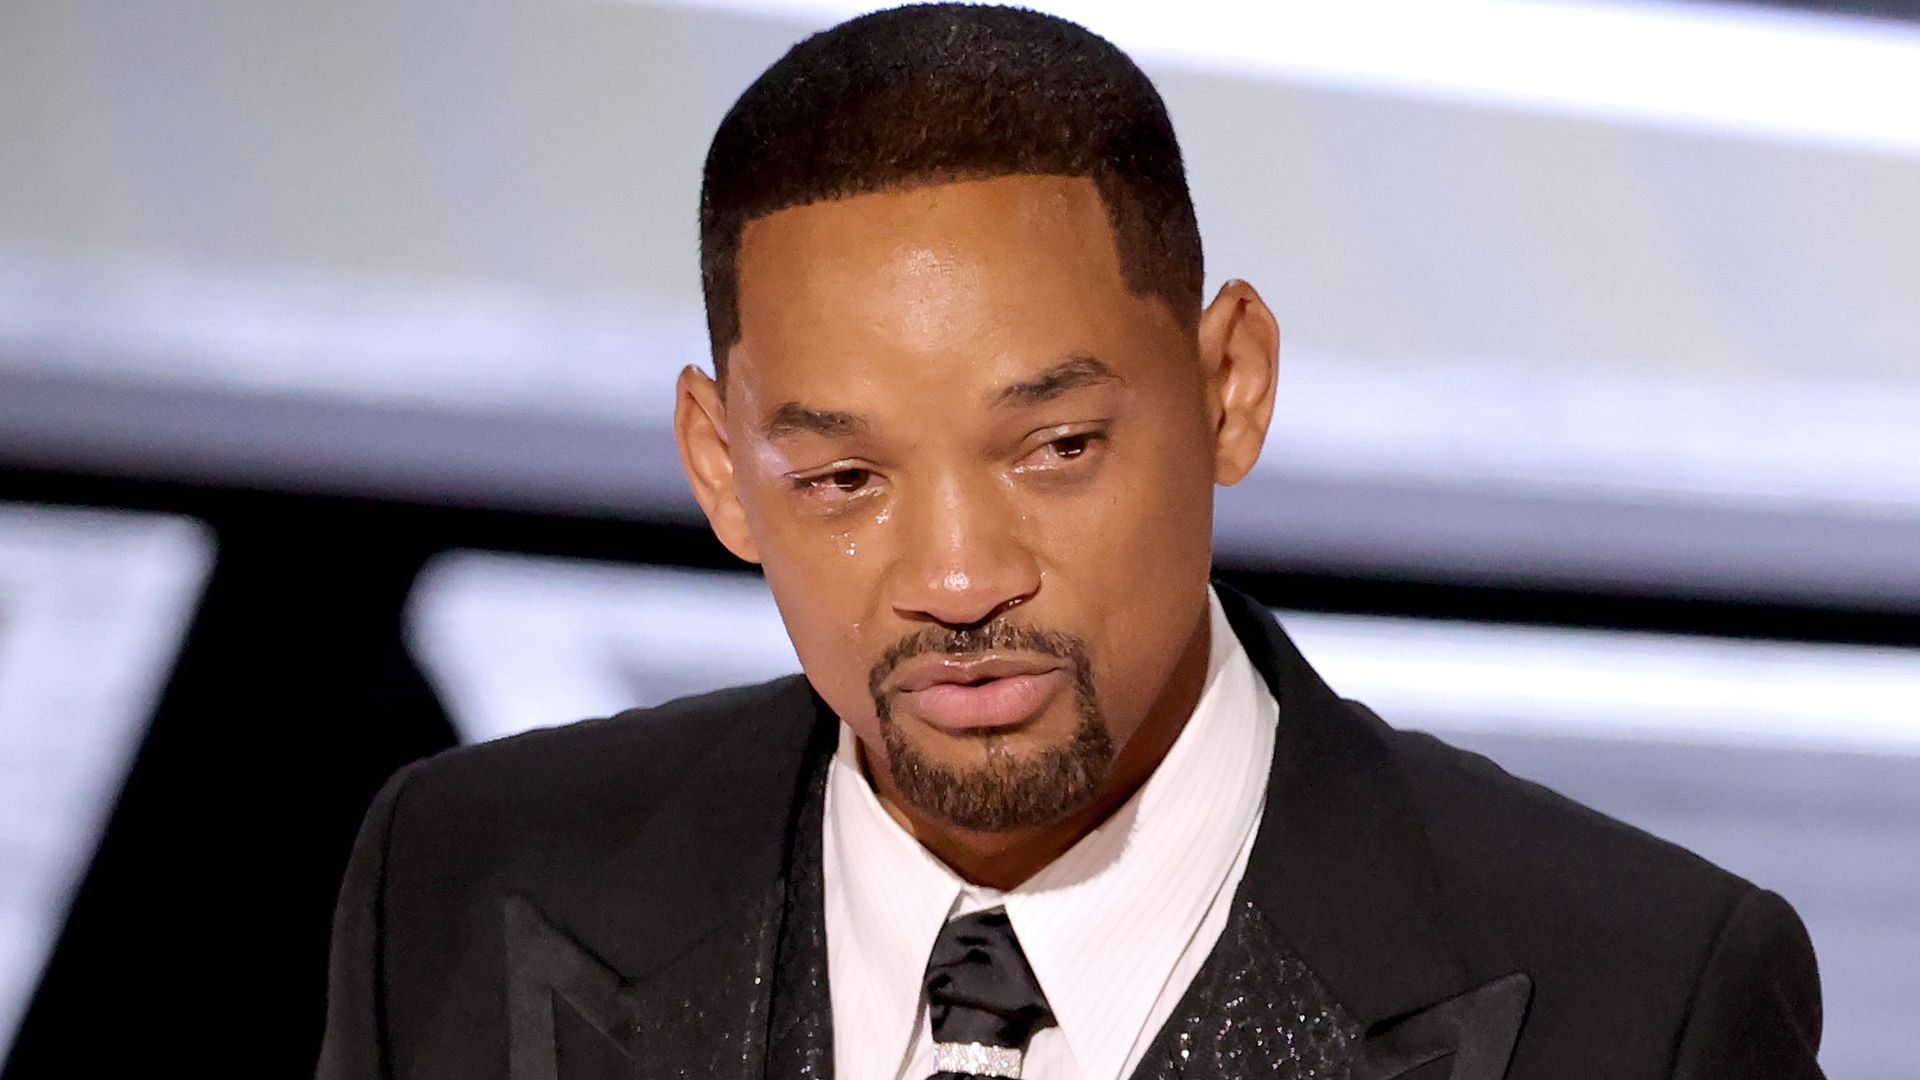 Will Smith accepts the best actor award at the Oscars.